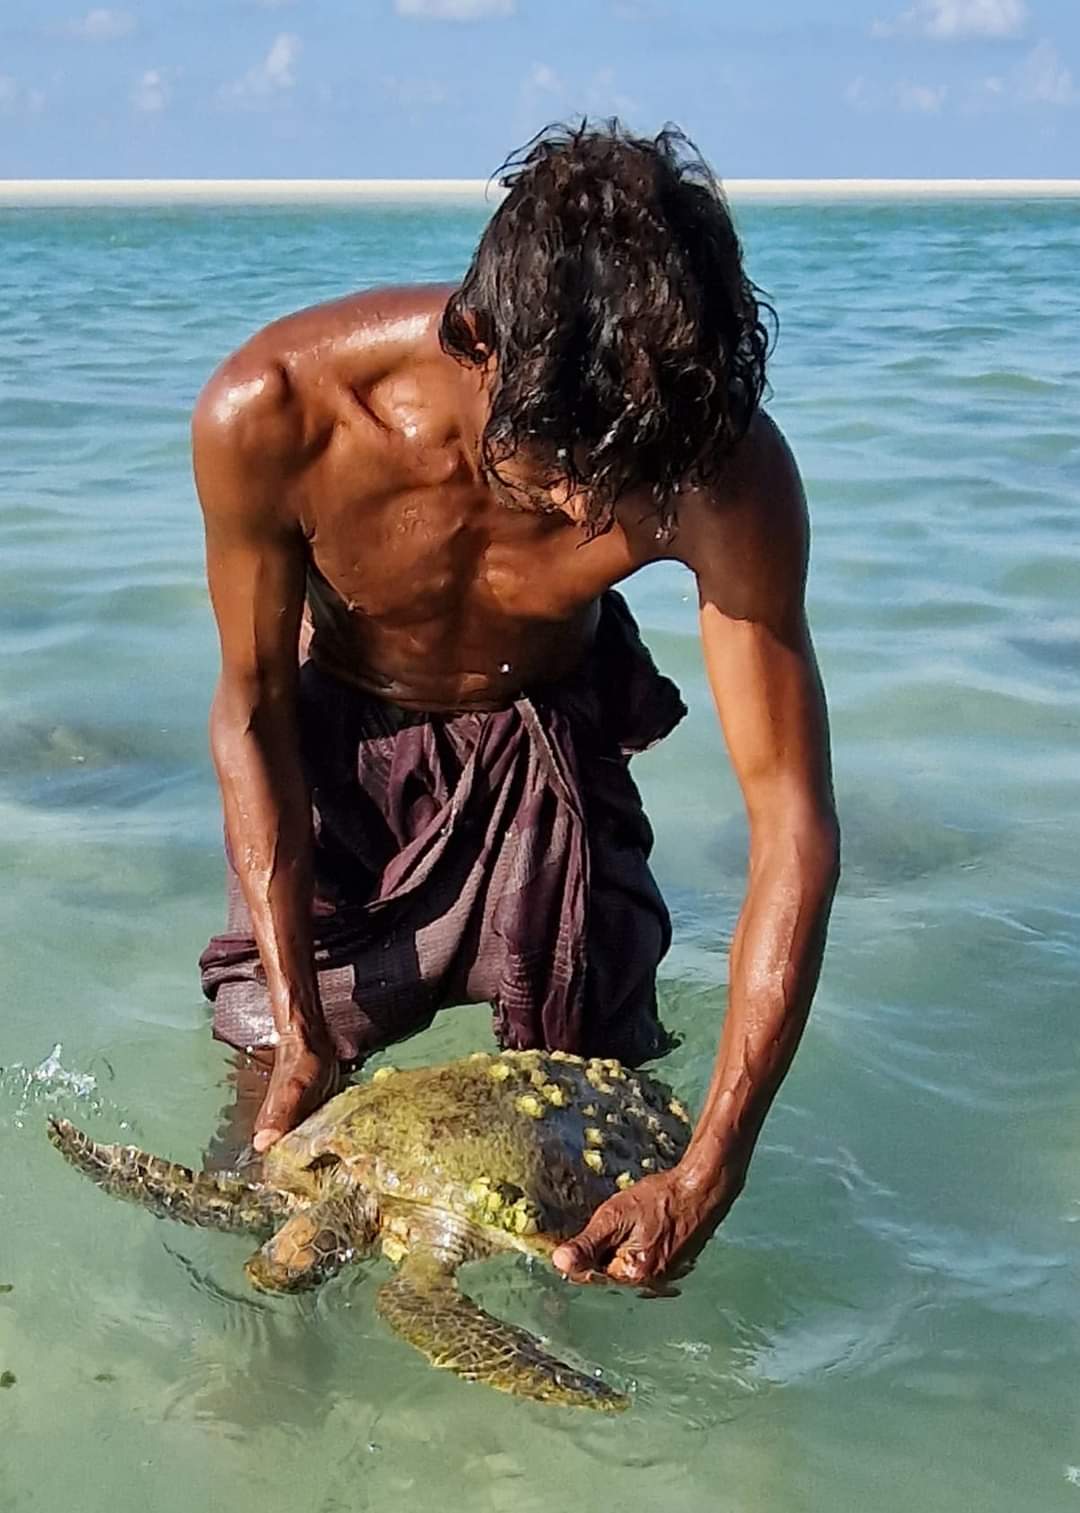 The caveman removing barnacles from a turtle in Socotra